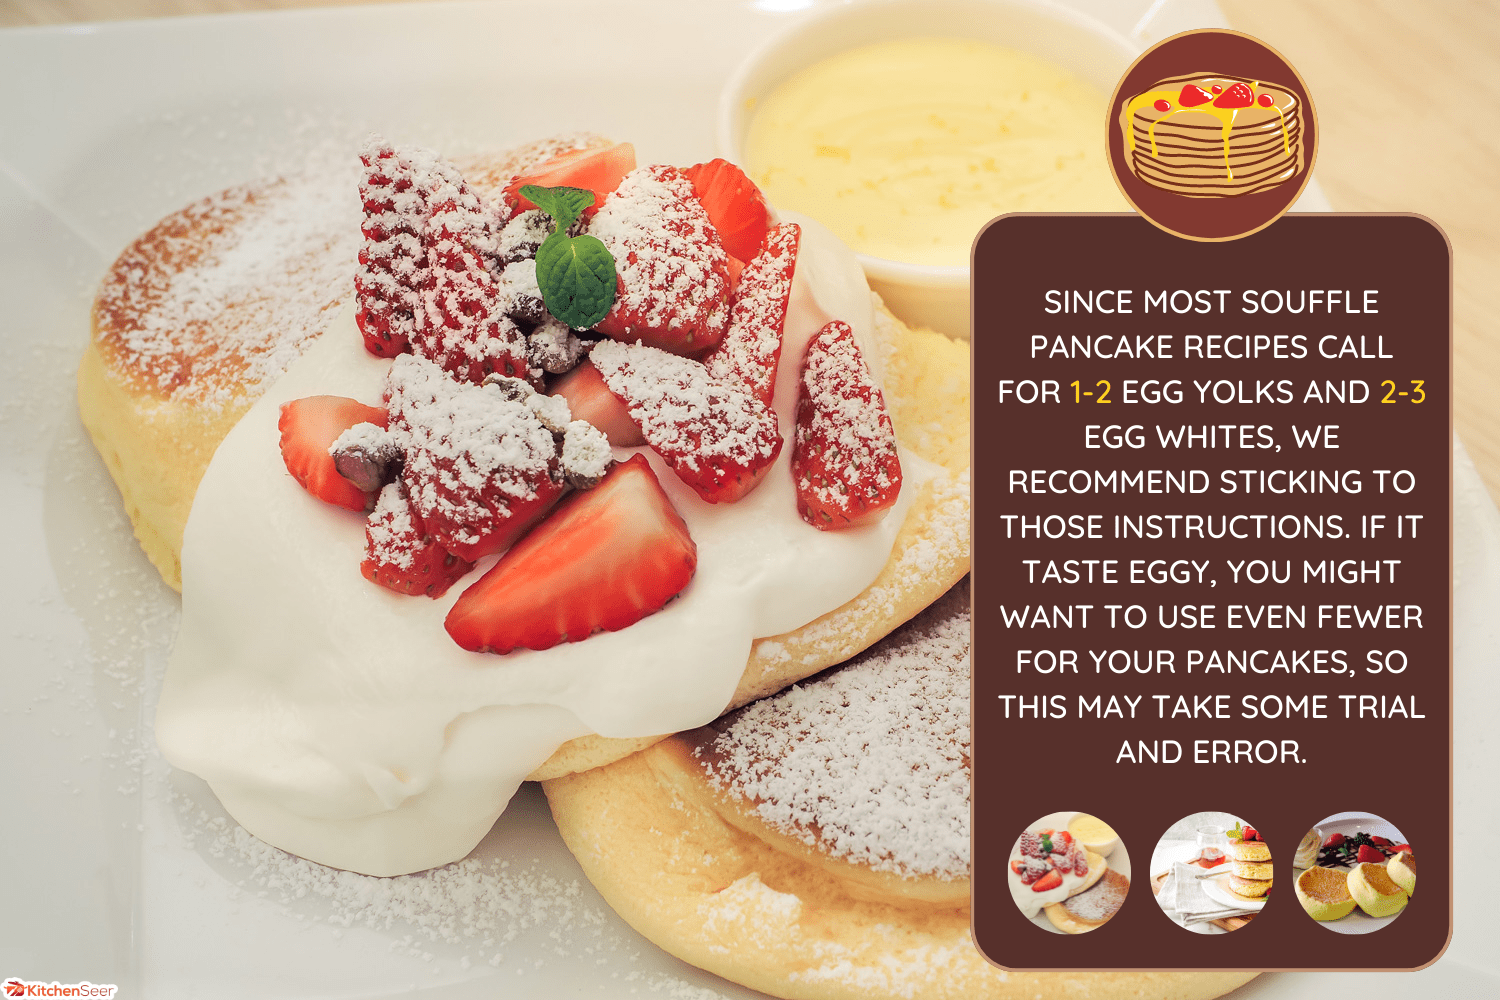 Strawberry Cheese Souffle Pancakes with Fondue - Do Souffle Pancakes Taste Eggy What Is Normal